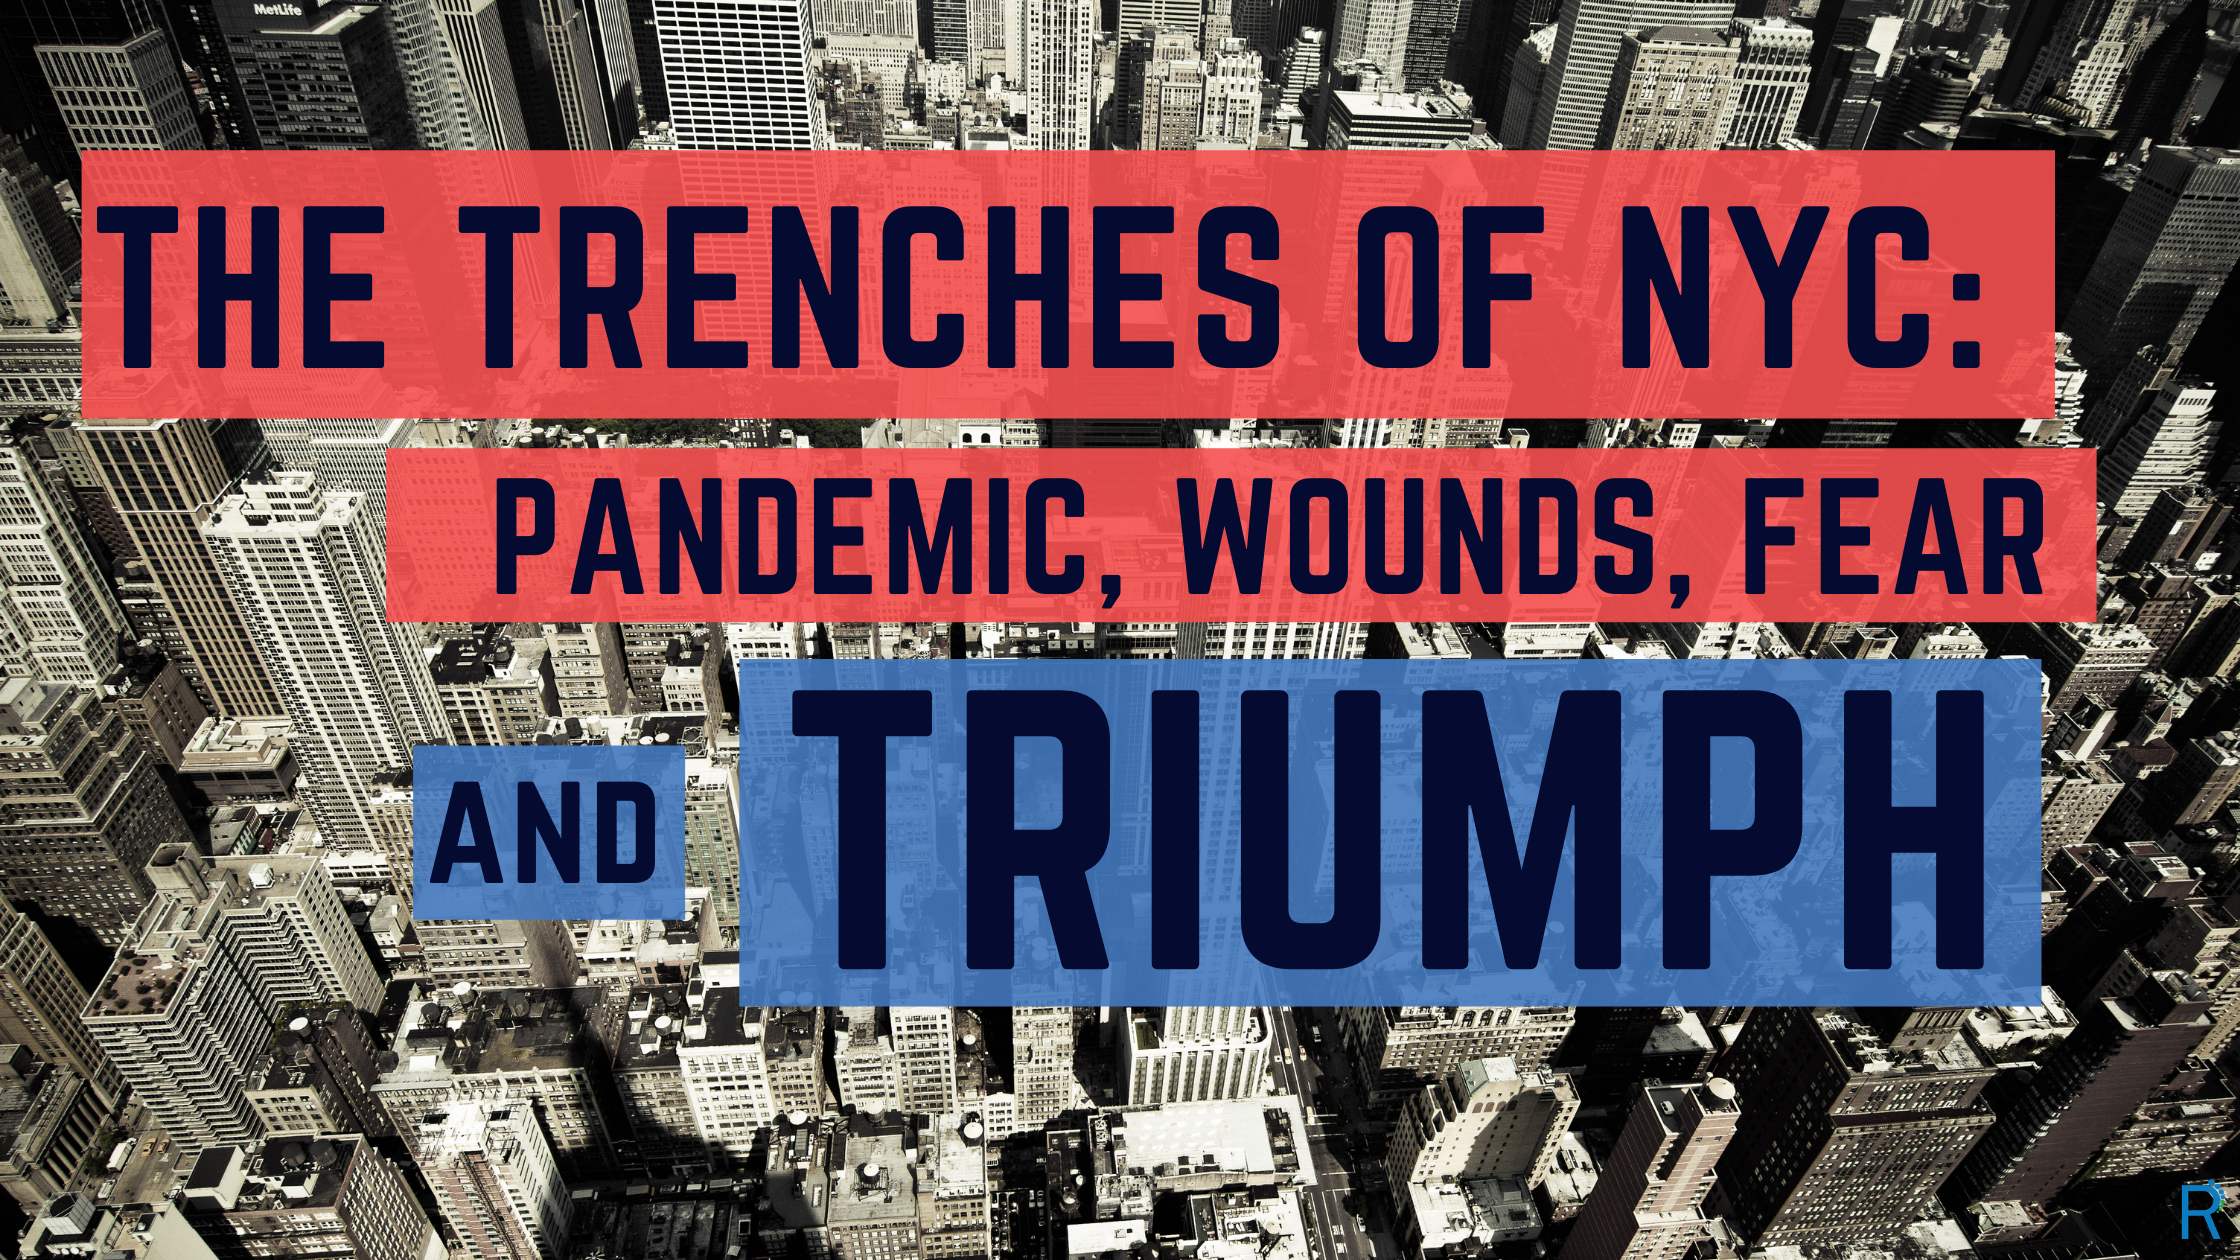 The Trenches of NYC: Pandemic, Wounds, Fear and Triumph